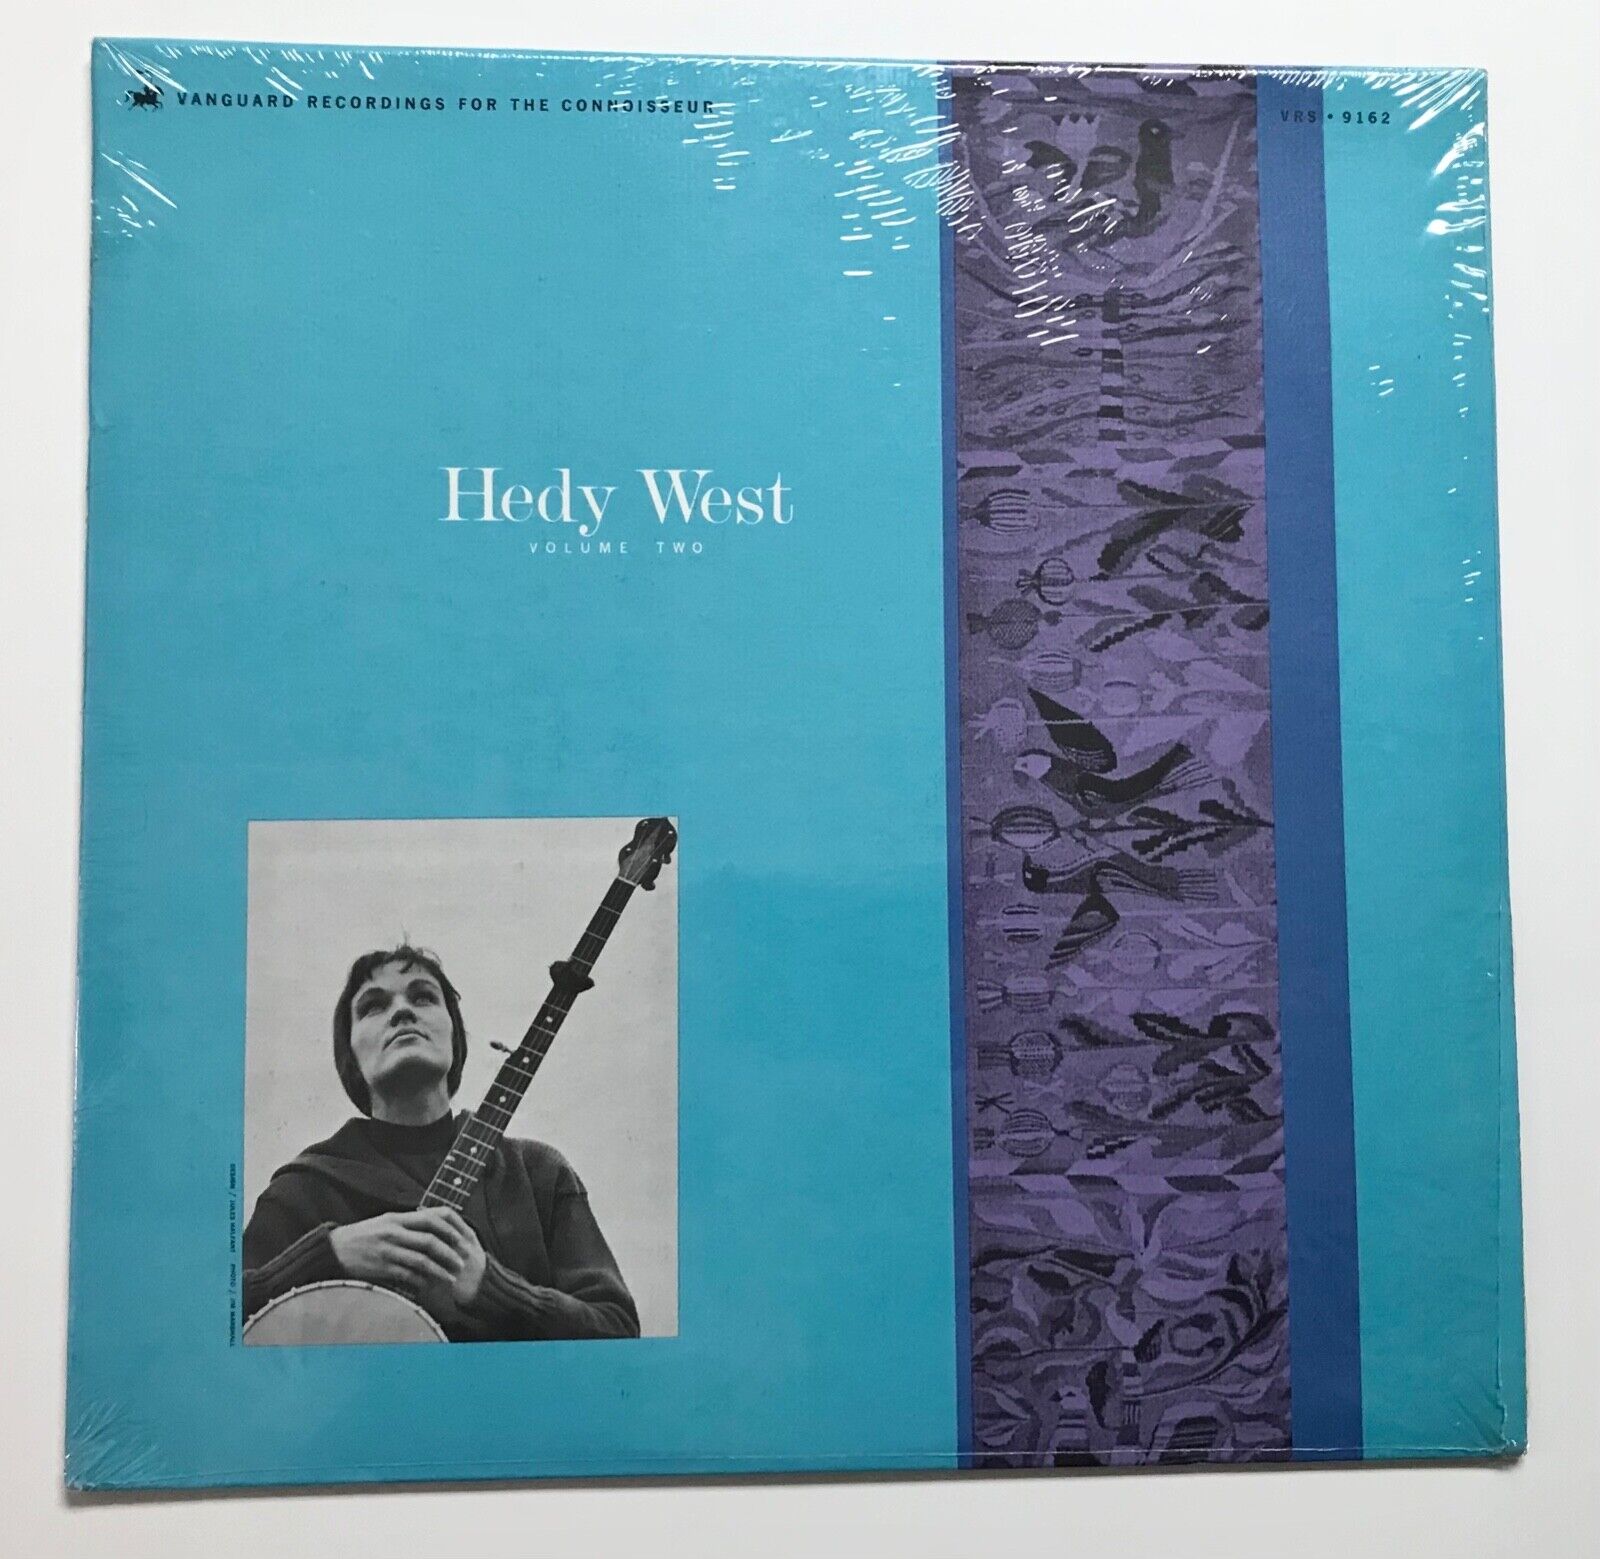 HEDY WEST: Volume Two (Vinyl LP Record Sealed)